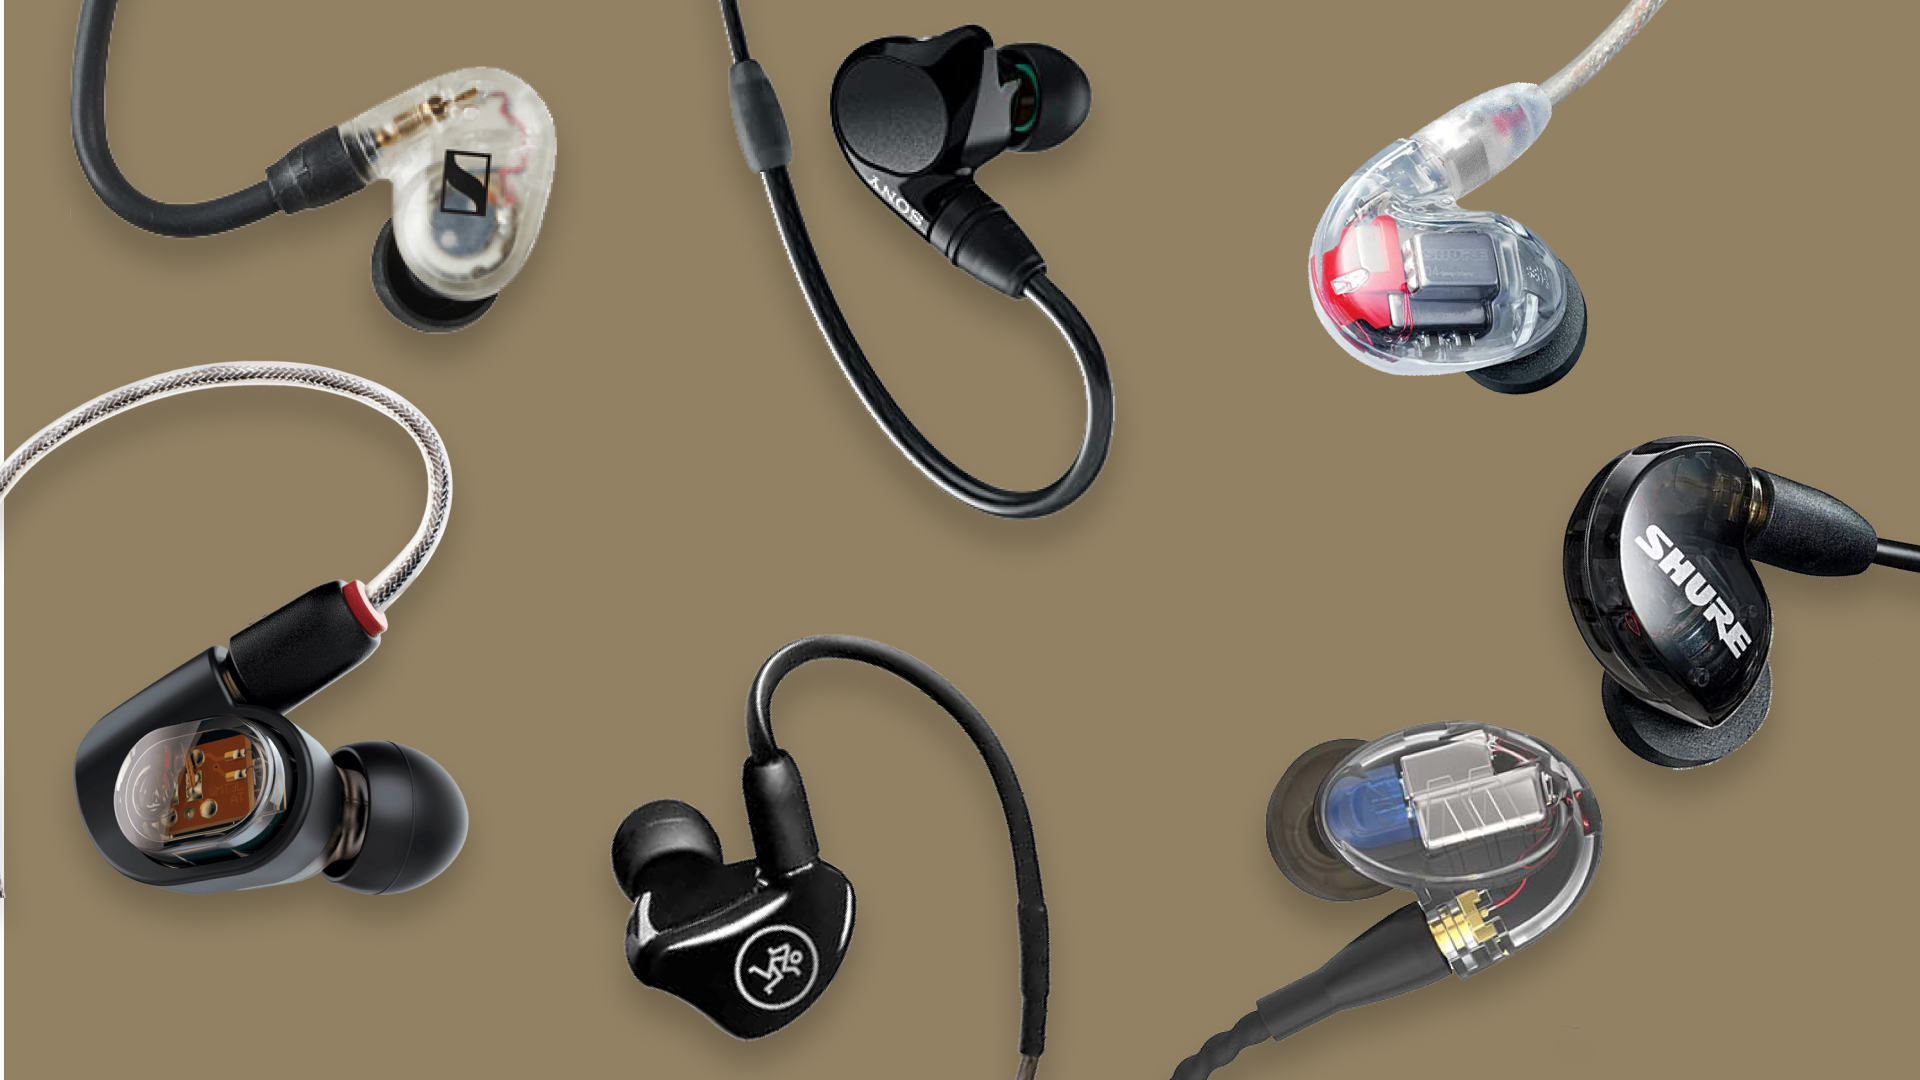 In-ear Monitors: The 7 Best Earphones to Hear Yourself On Stage